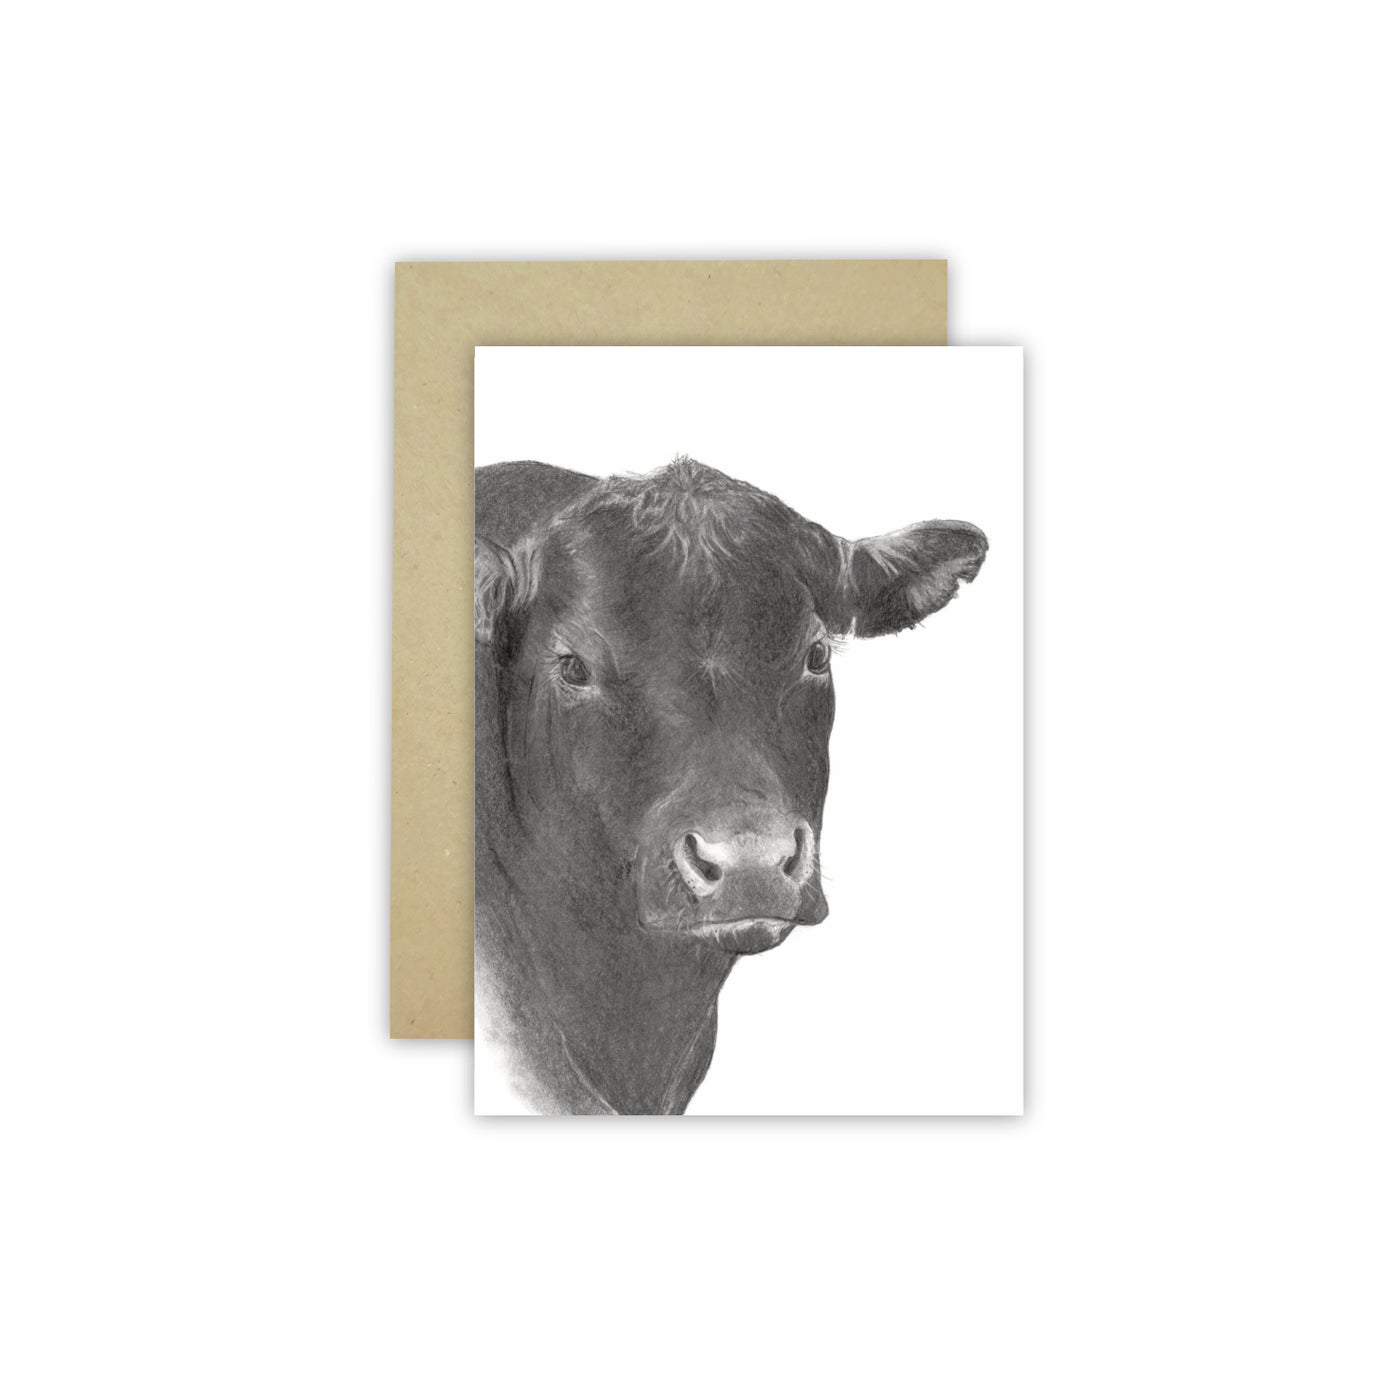 Angus Bull C6 Card - Wholesale - NEW SIZE